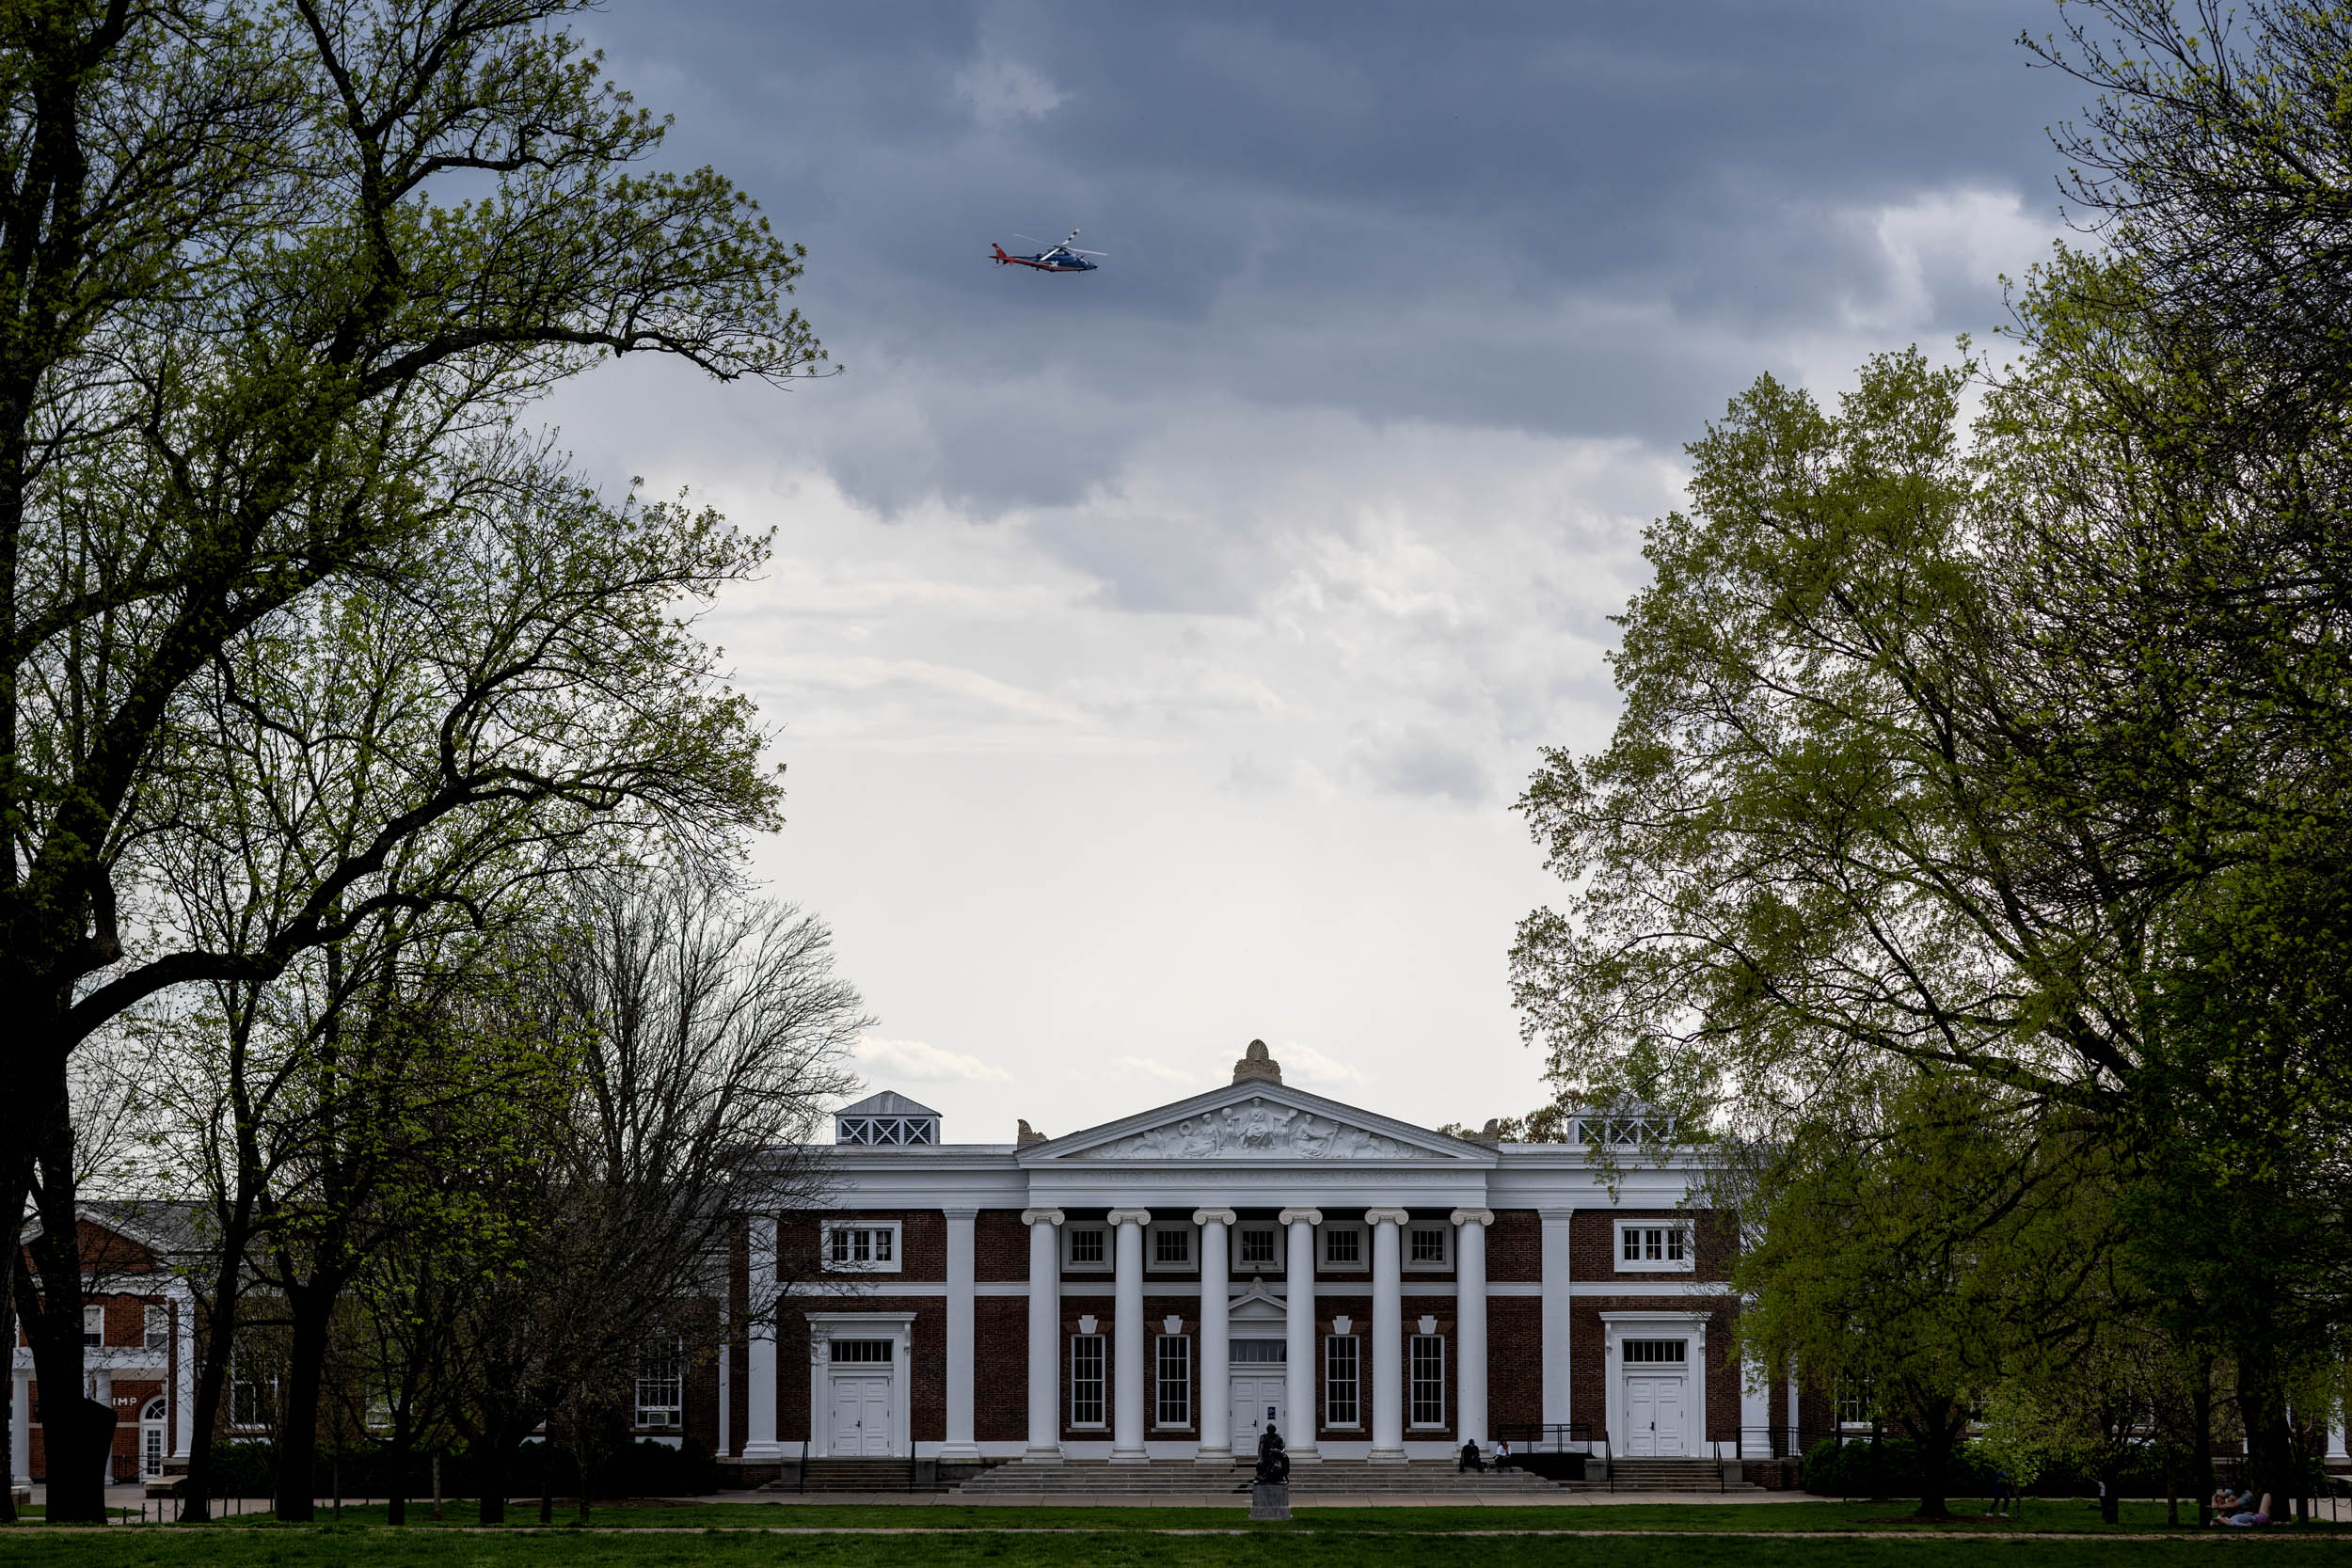 Pegasus flying over a UVA building